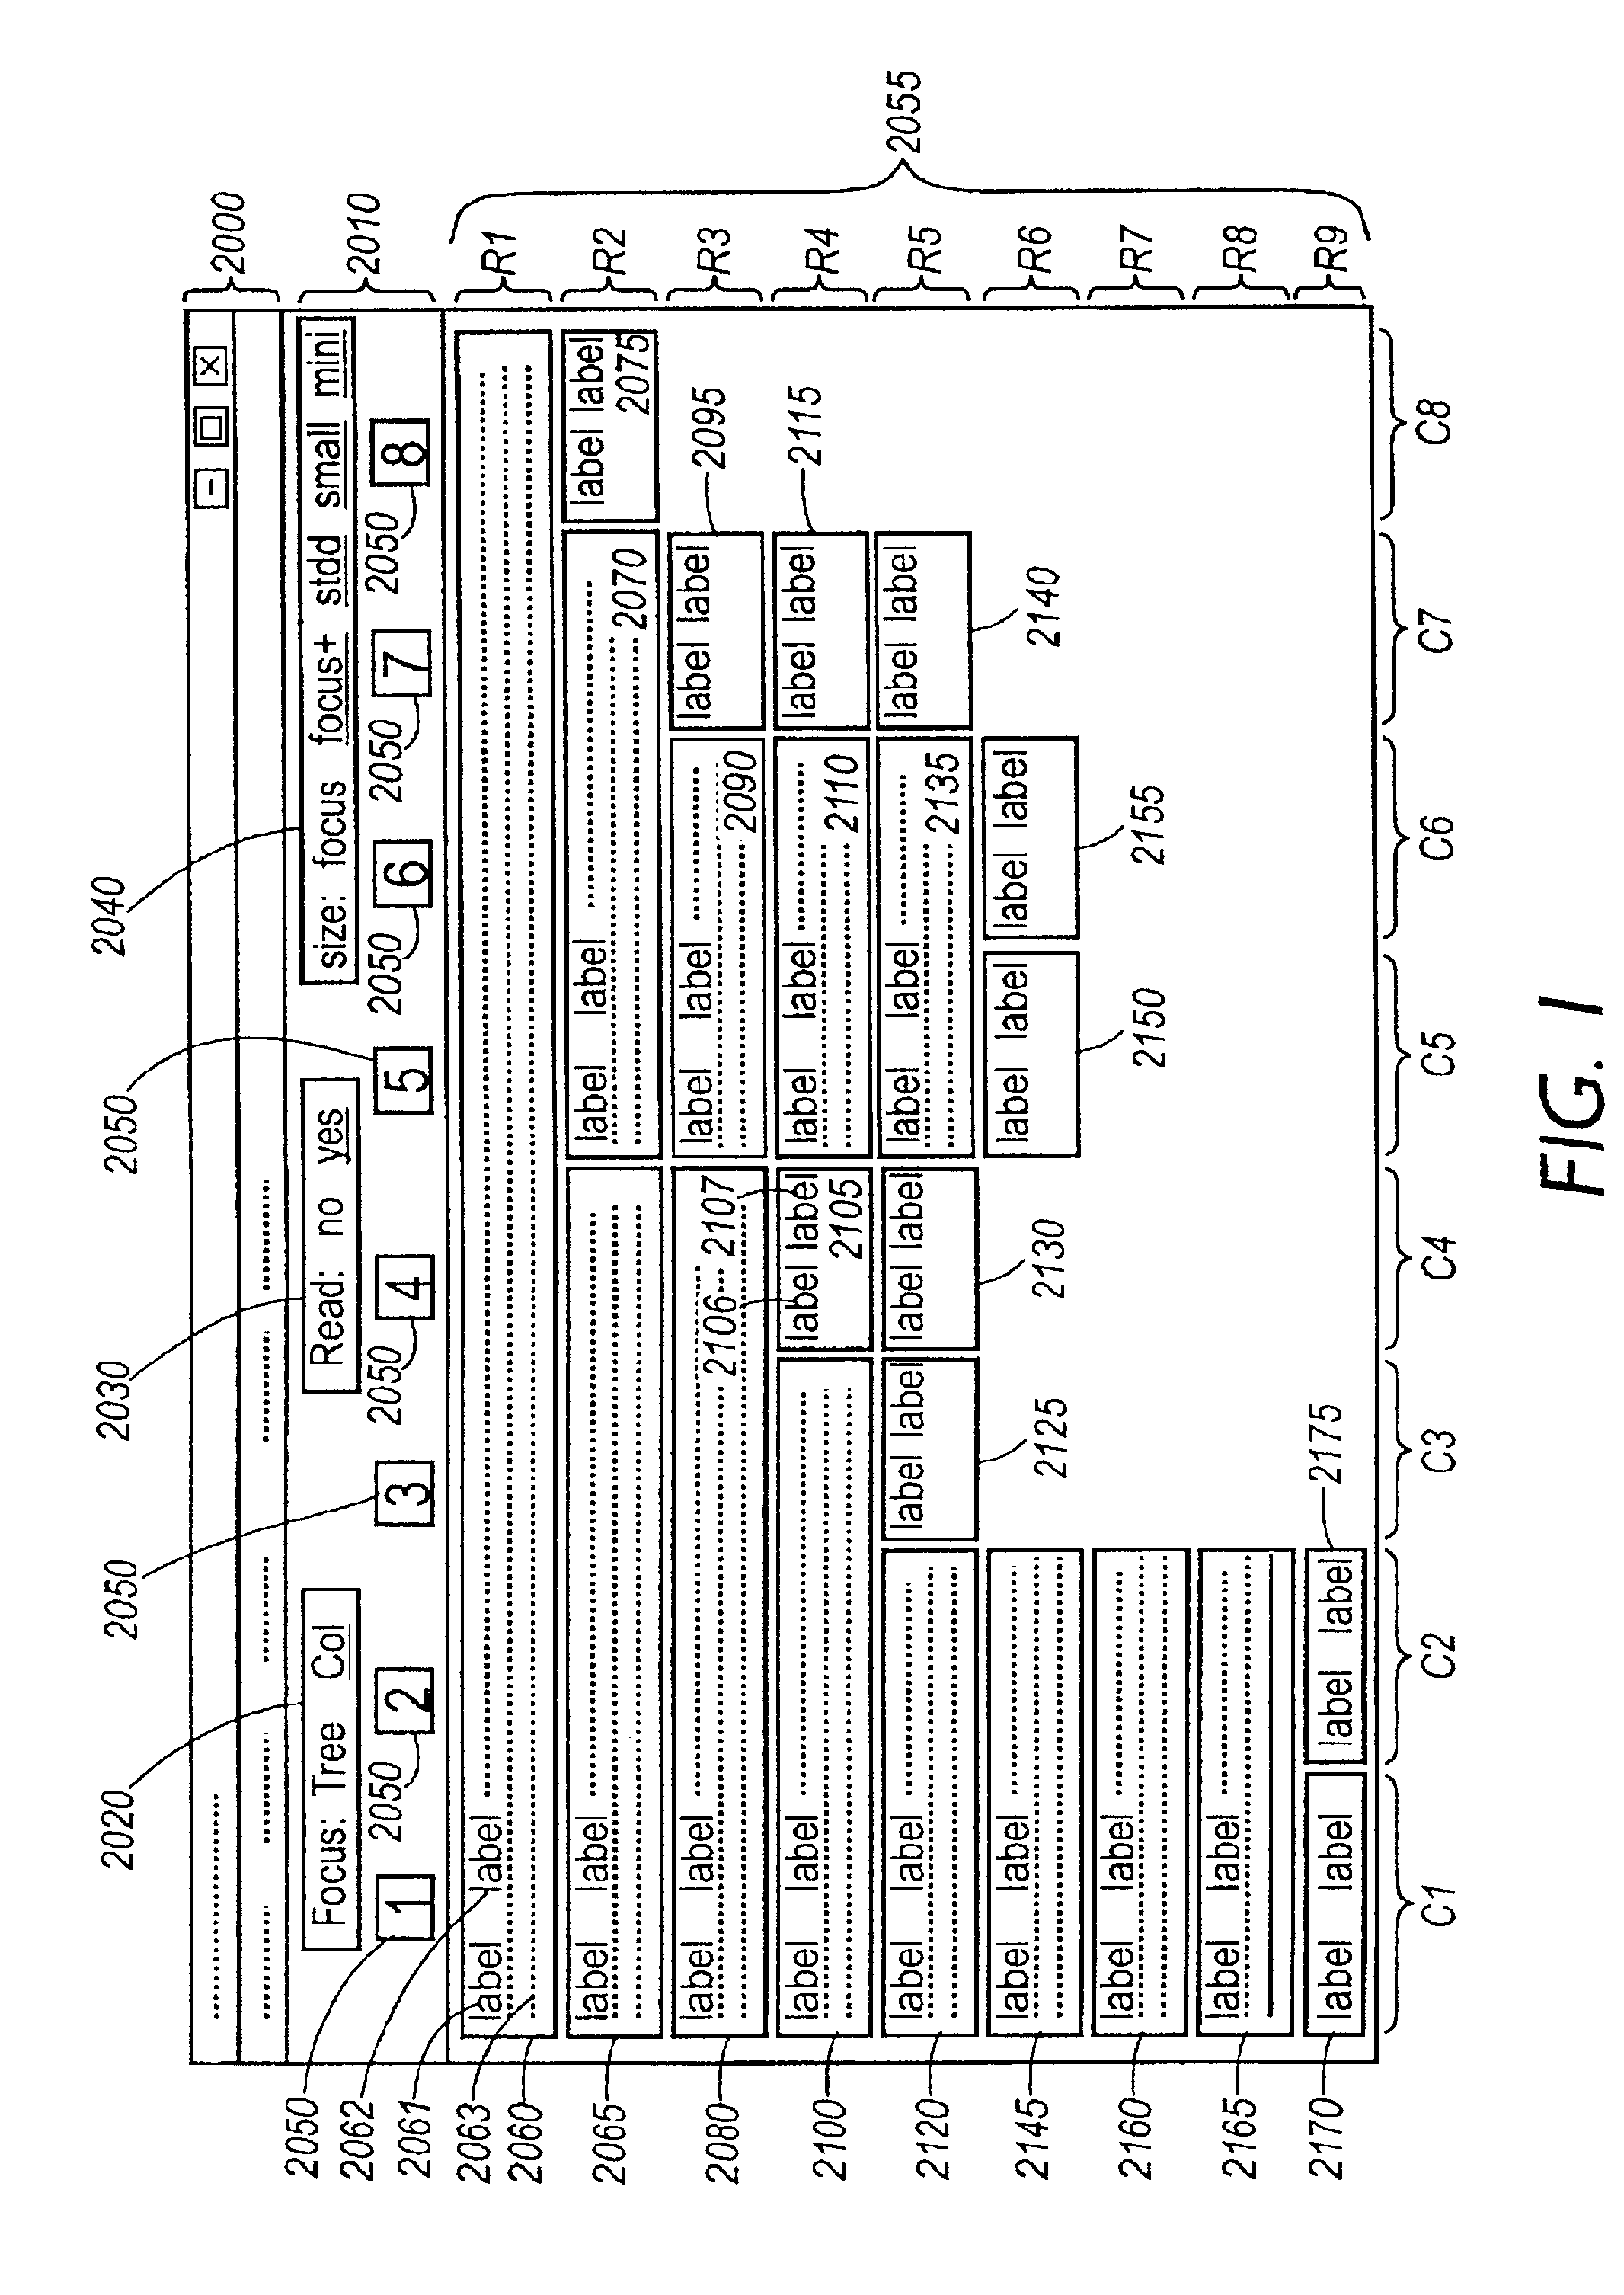 Method and apparatus for the viewing and exploration of the content of hierarchical information